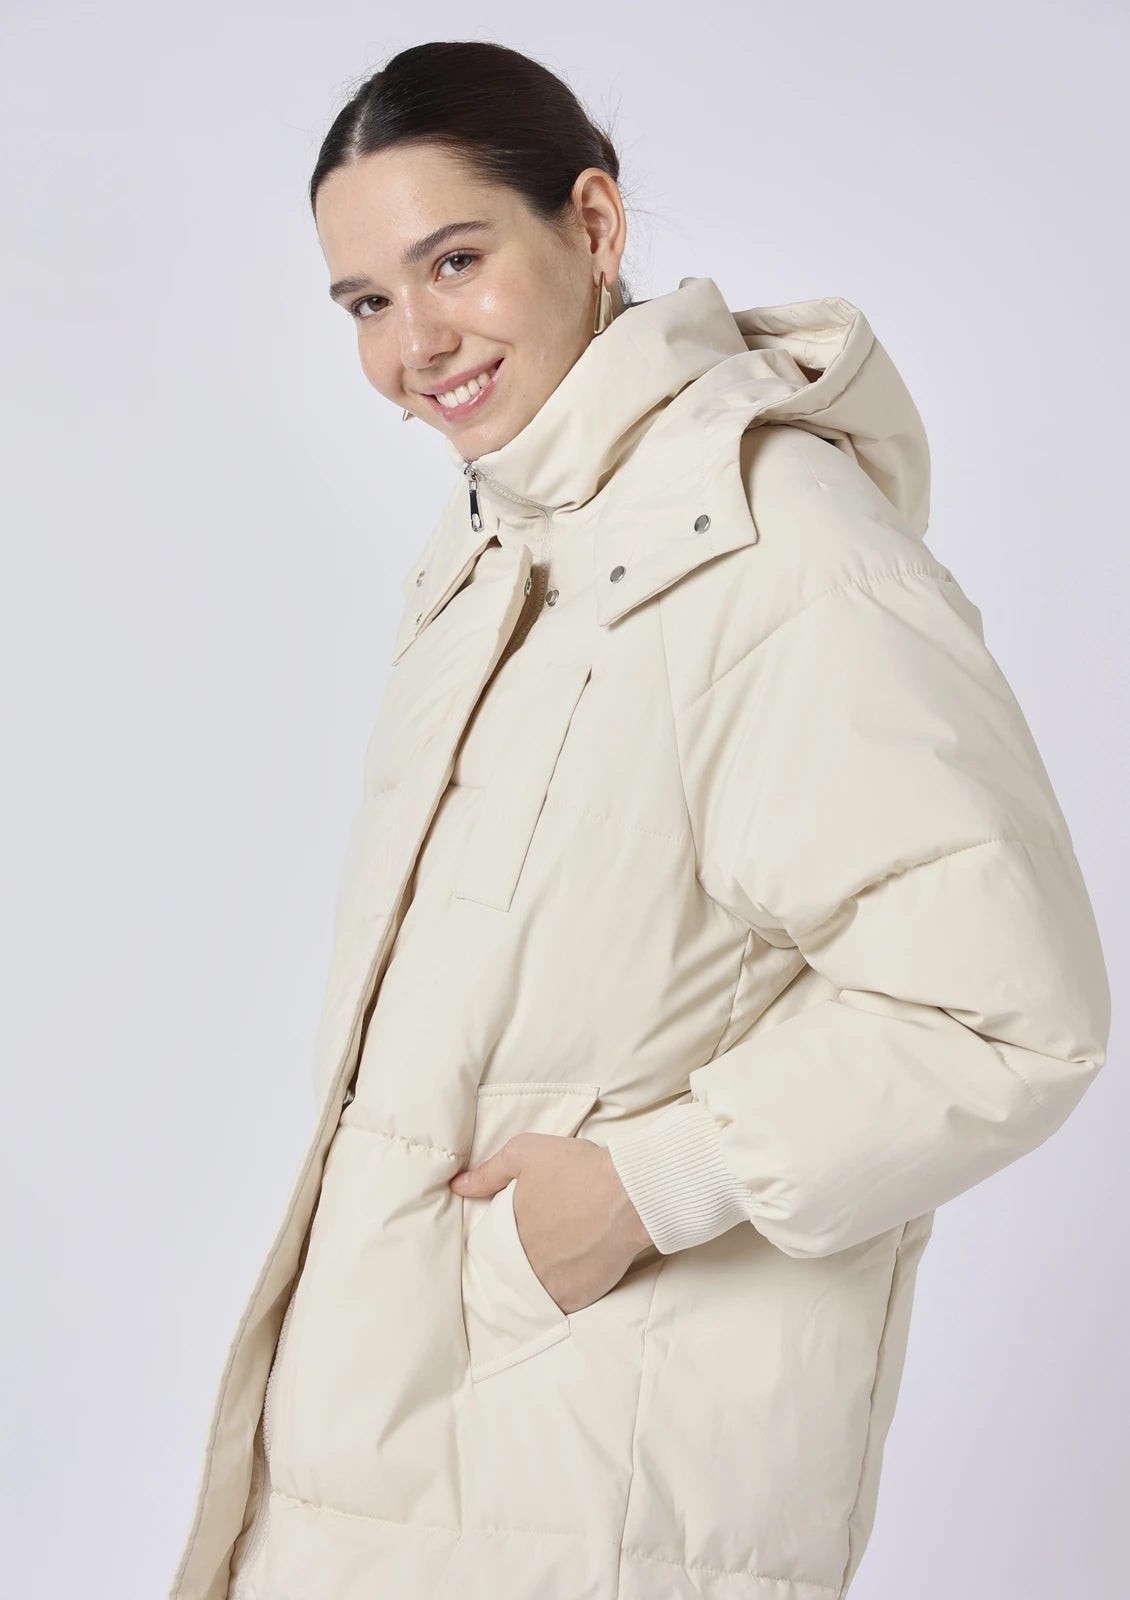 Classic Hooded Long Puffer Jacket - Super Warm, Water-Repellent, Daily ...